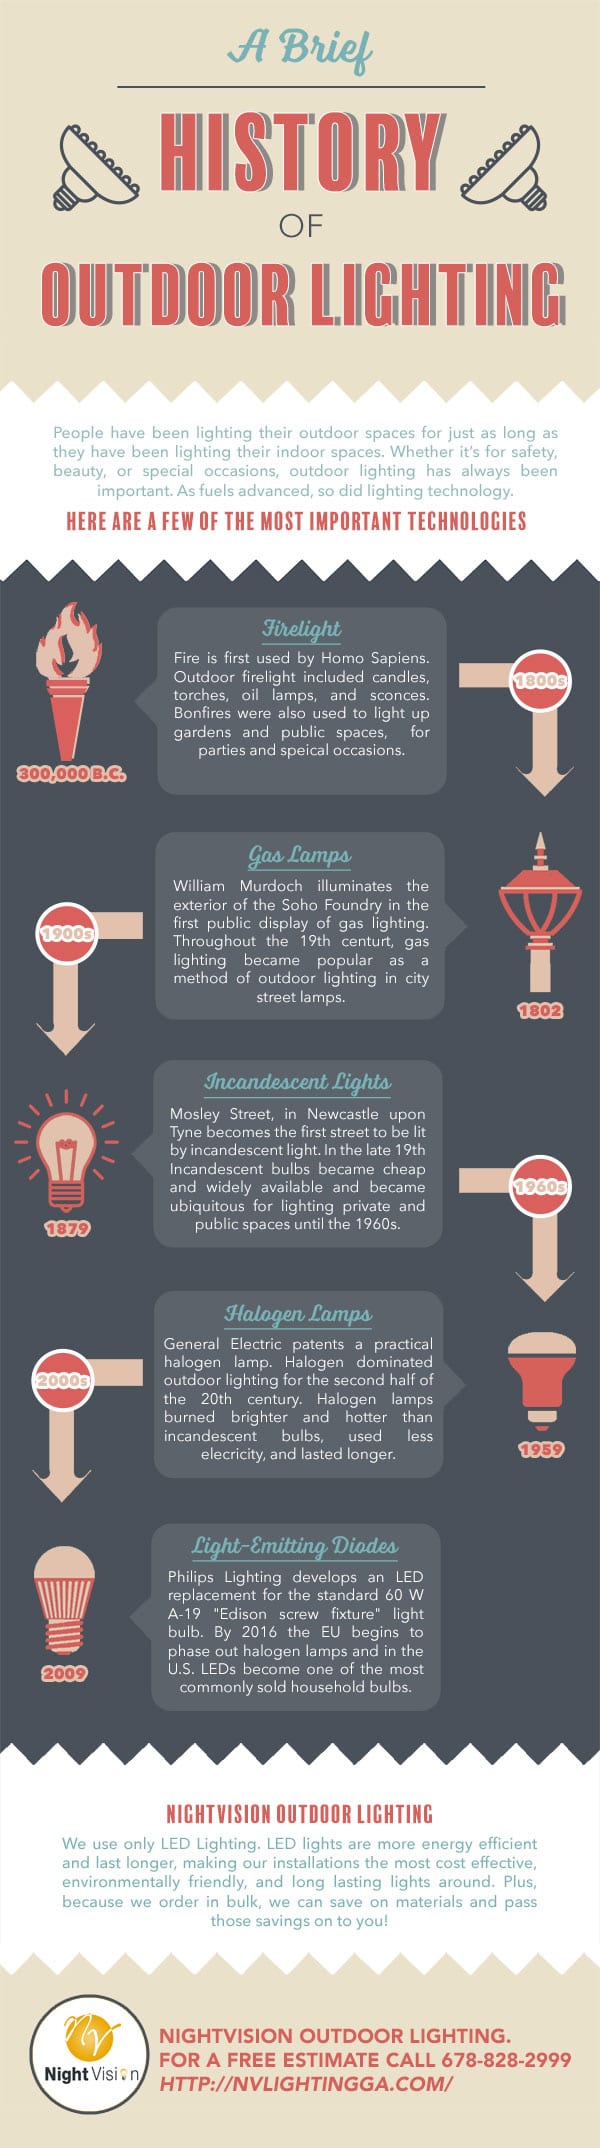 Brief History of Outdoor Lighting [infographic]